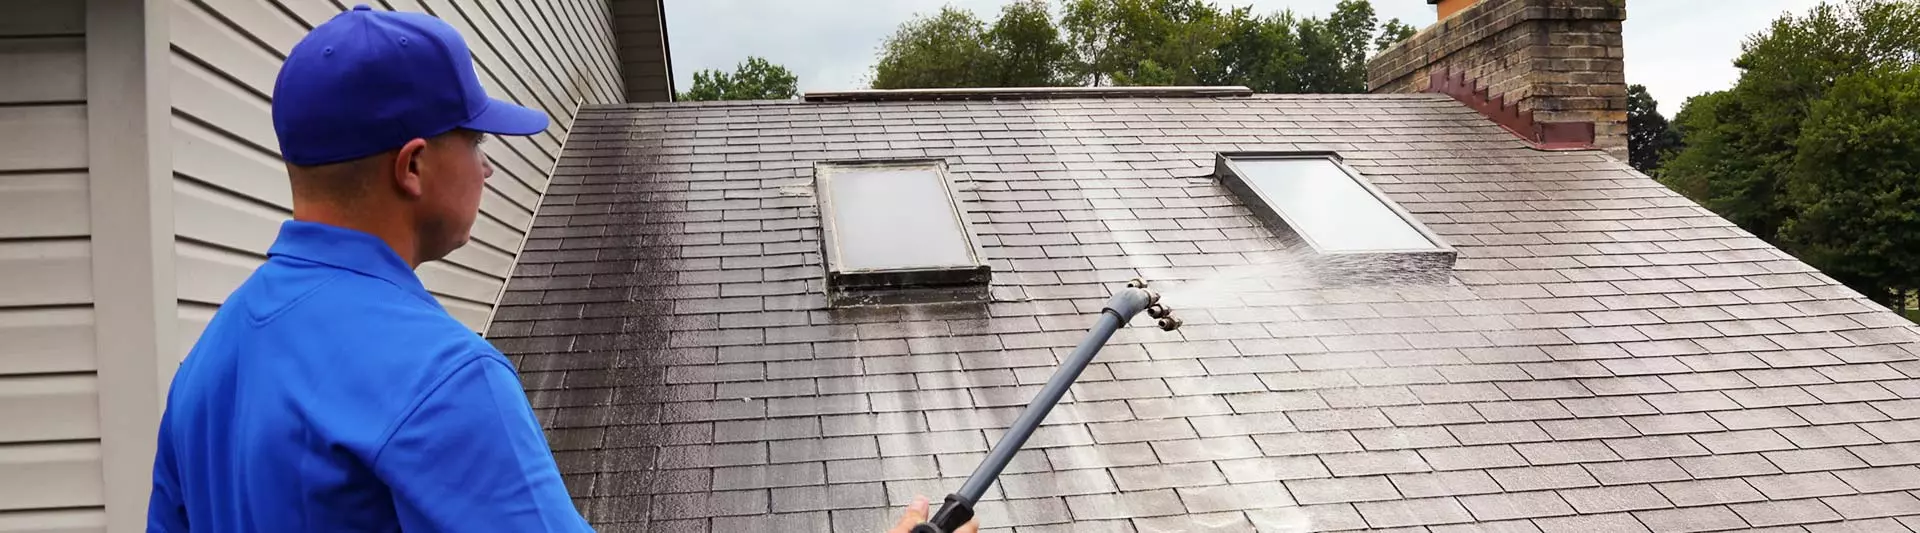 A-quick Pressure Washing Roof Cleaning Service Near Me Mount Vernon Wa